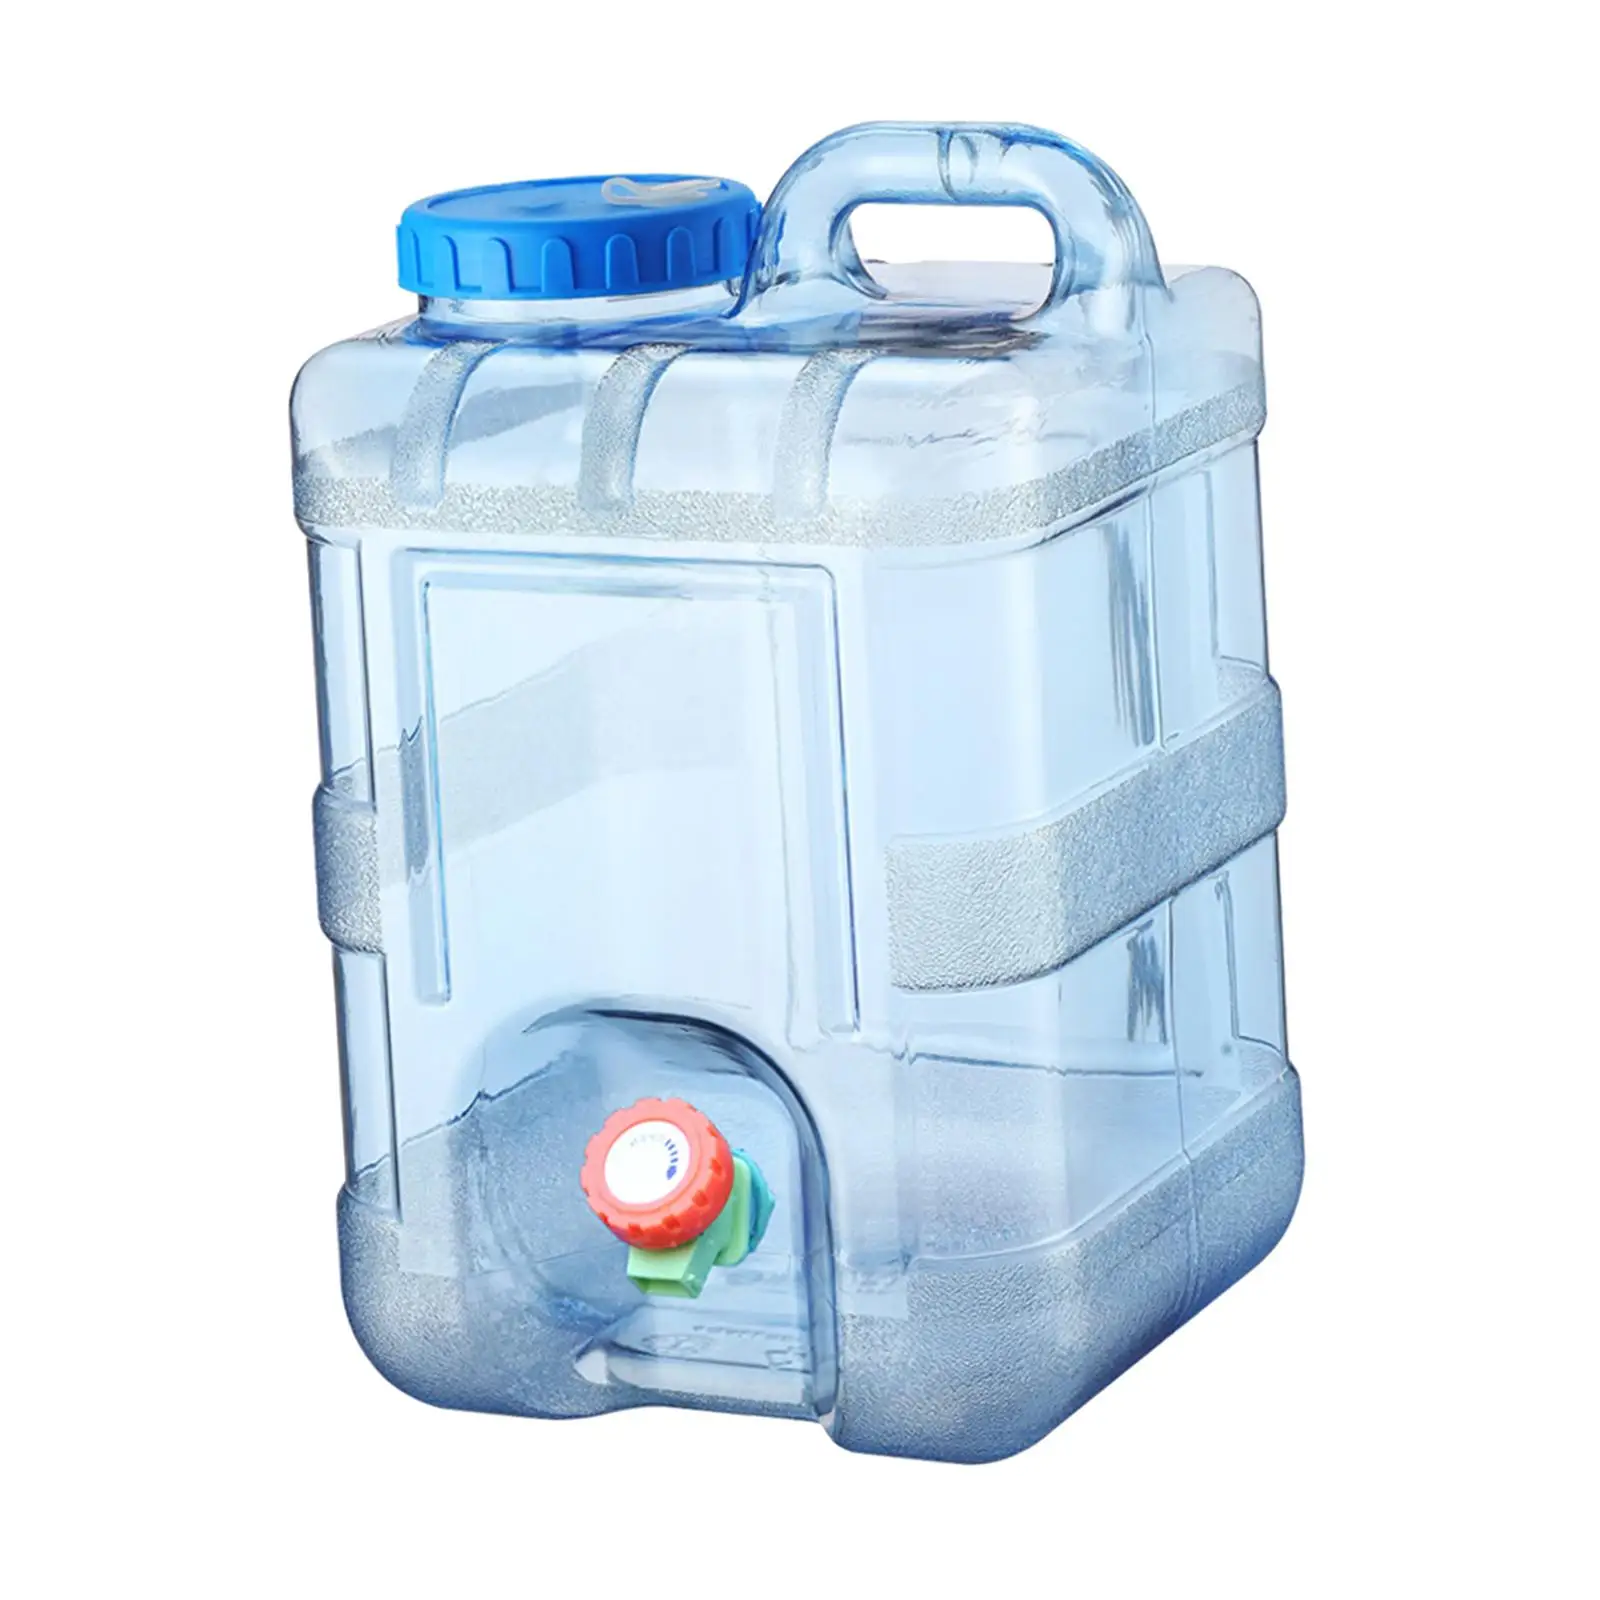 Portable Water Container with Spigot Water Canteen 10L Capacity for Cooking